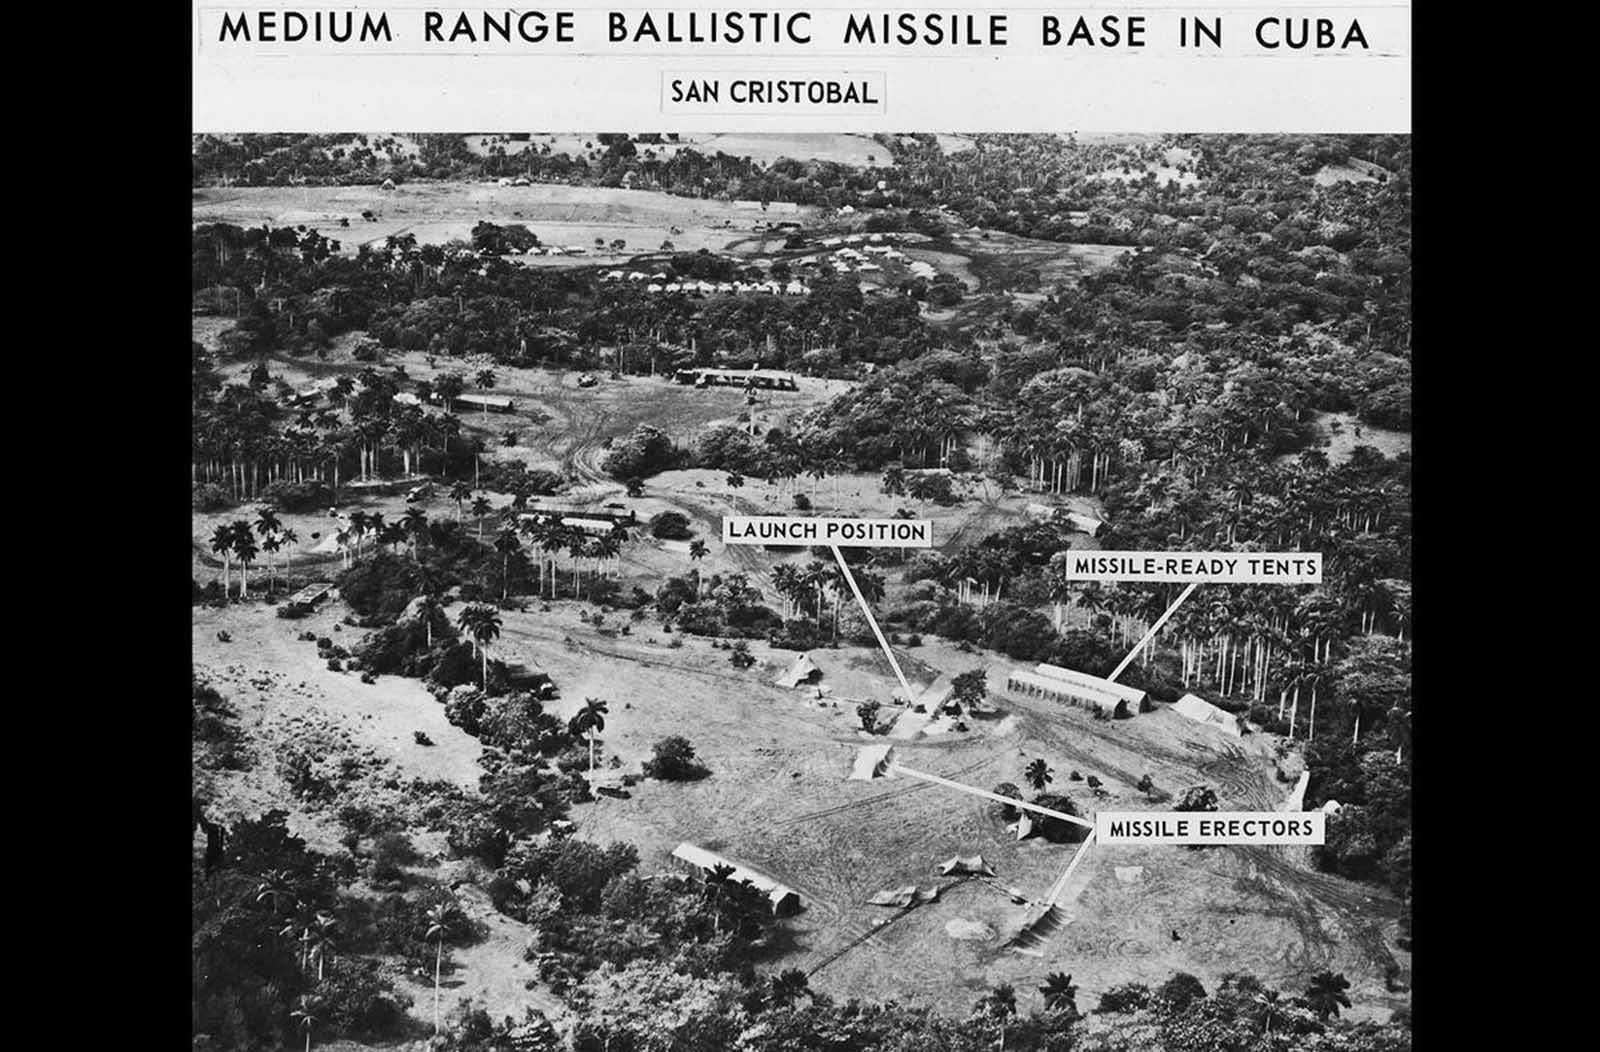 A spy photo of a medium range ballistic missile base in San Cristobal, Cuba, with labels detailing various parts of the base, displayed October of 1962.